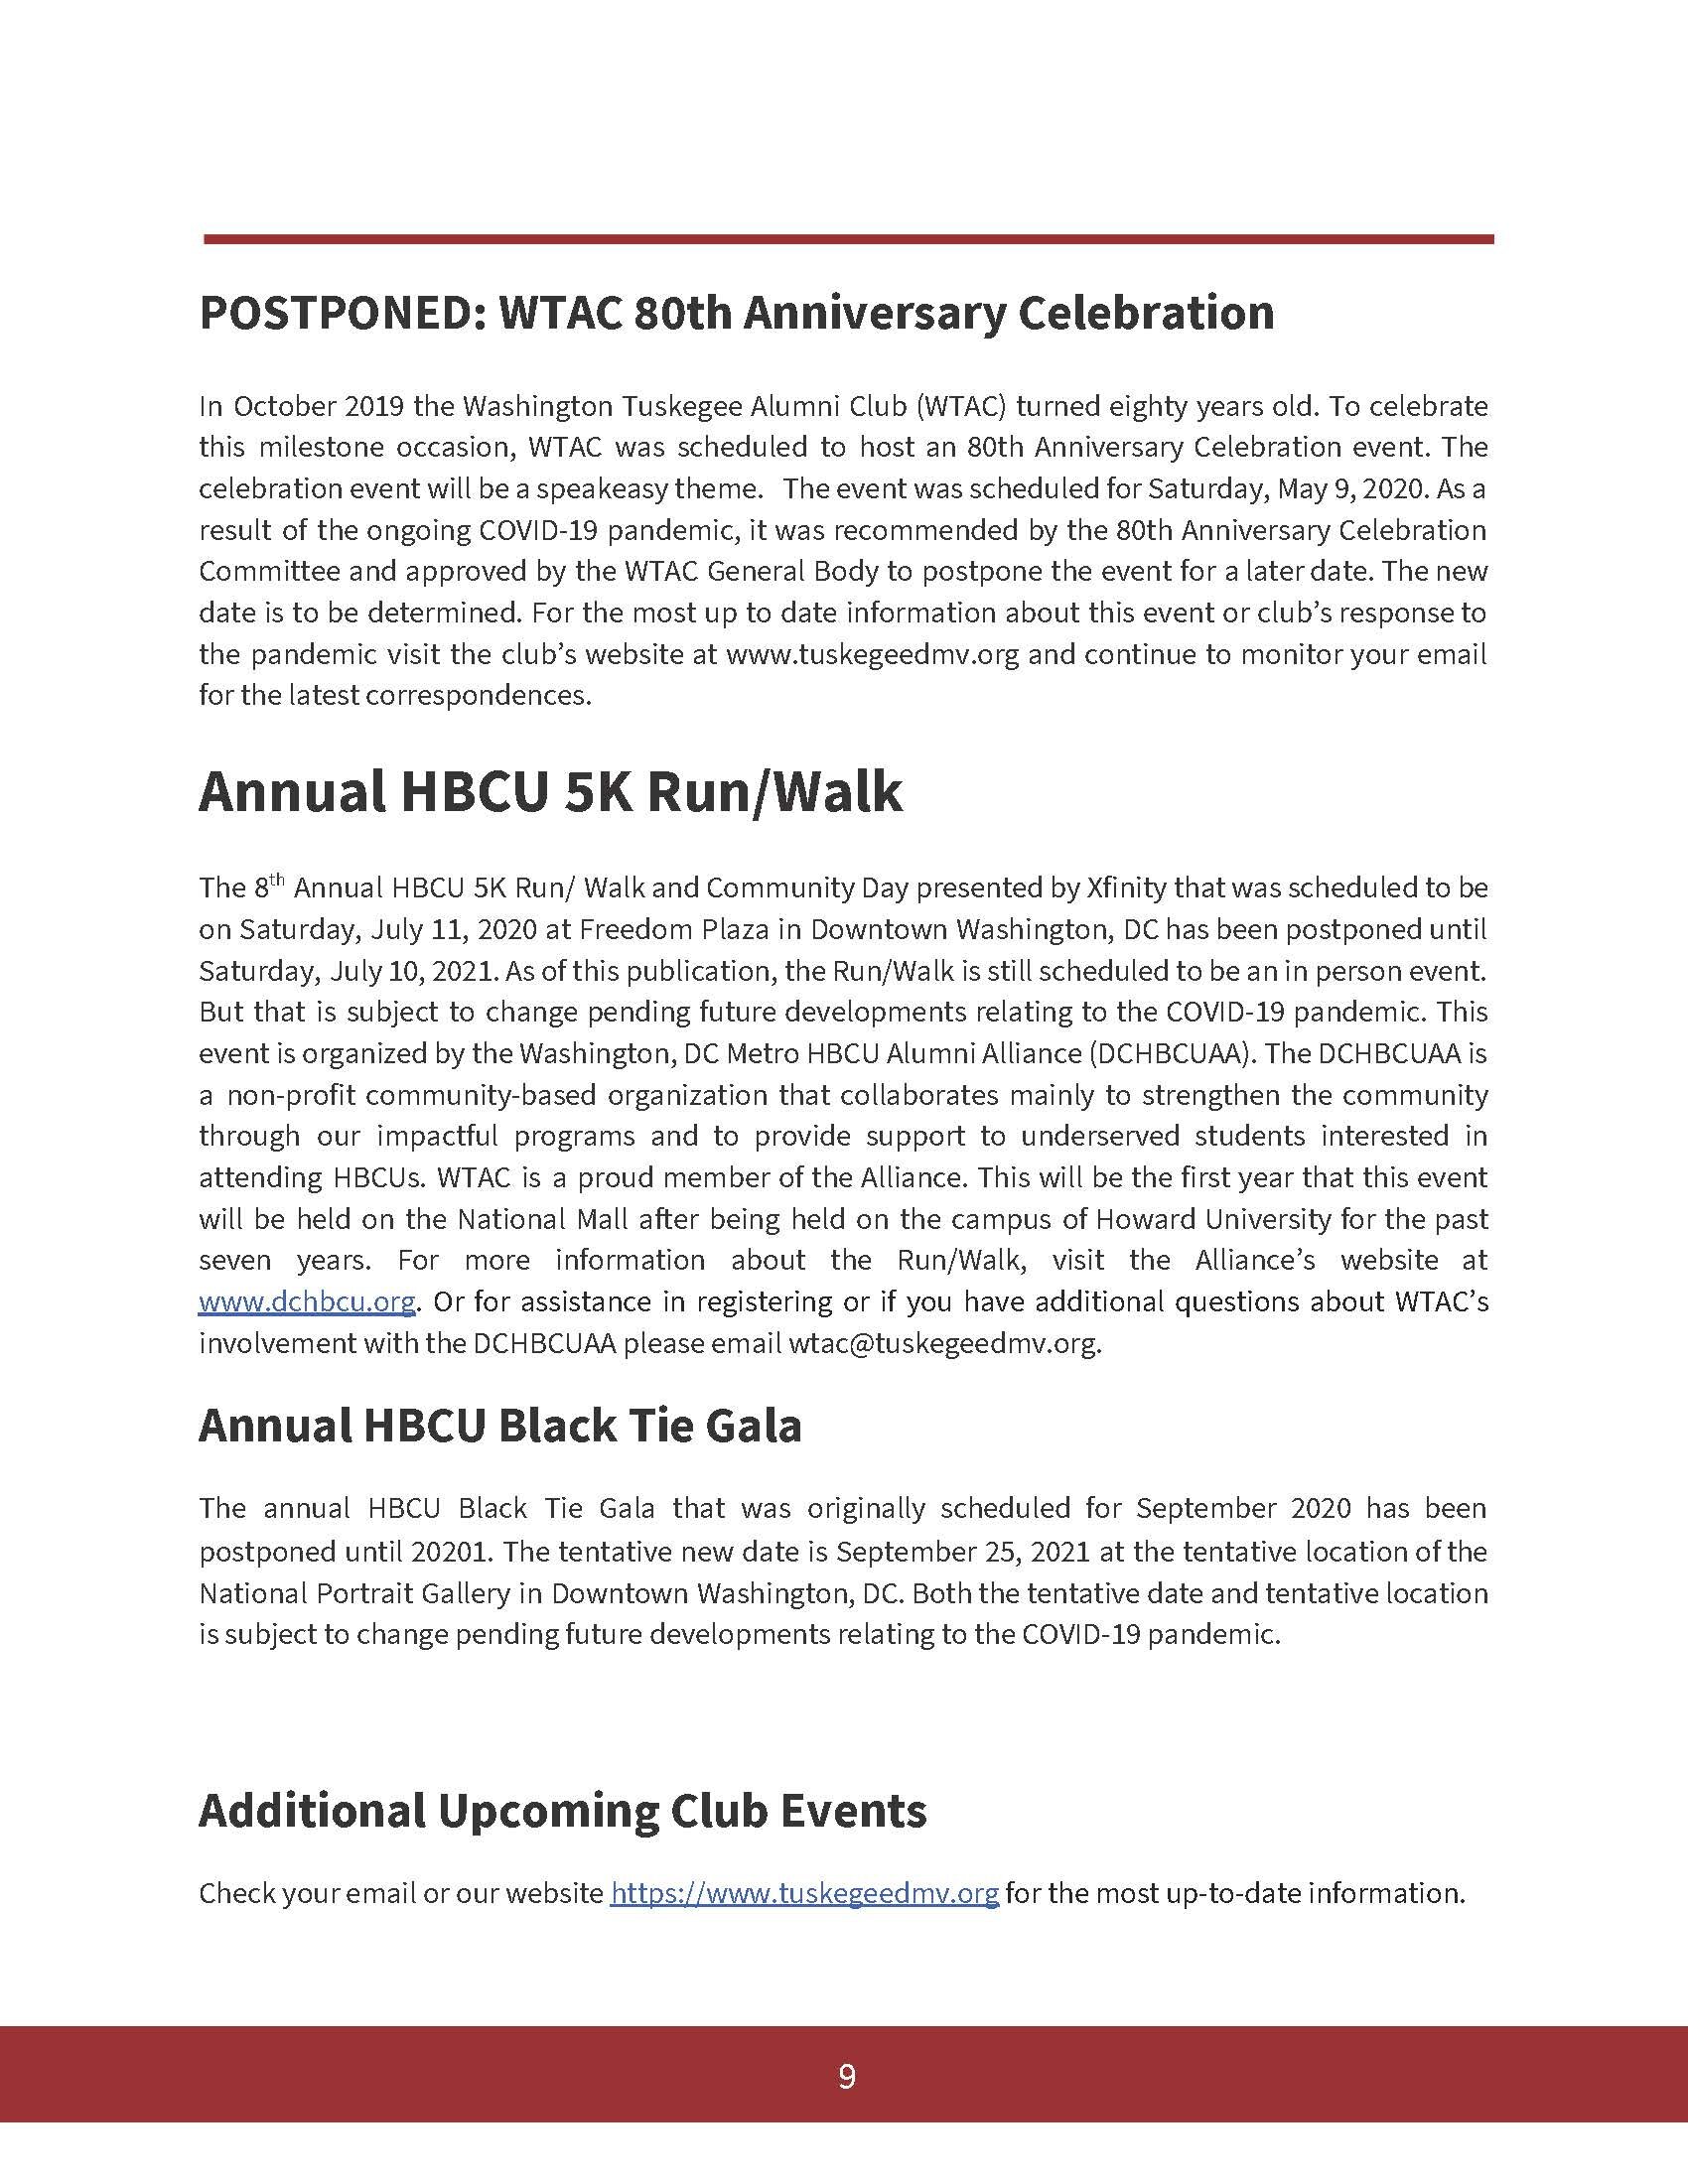 WTAC-Newsletter-Oct 2020_Page_09.jpg